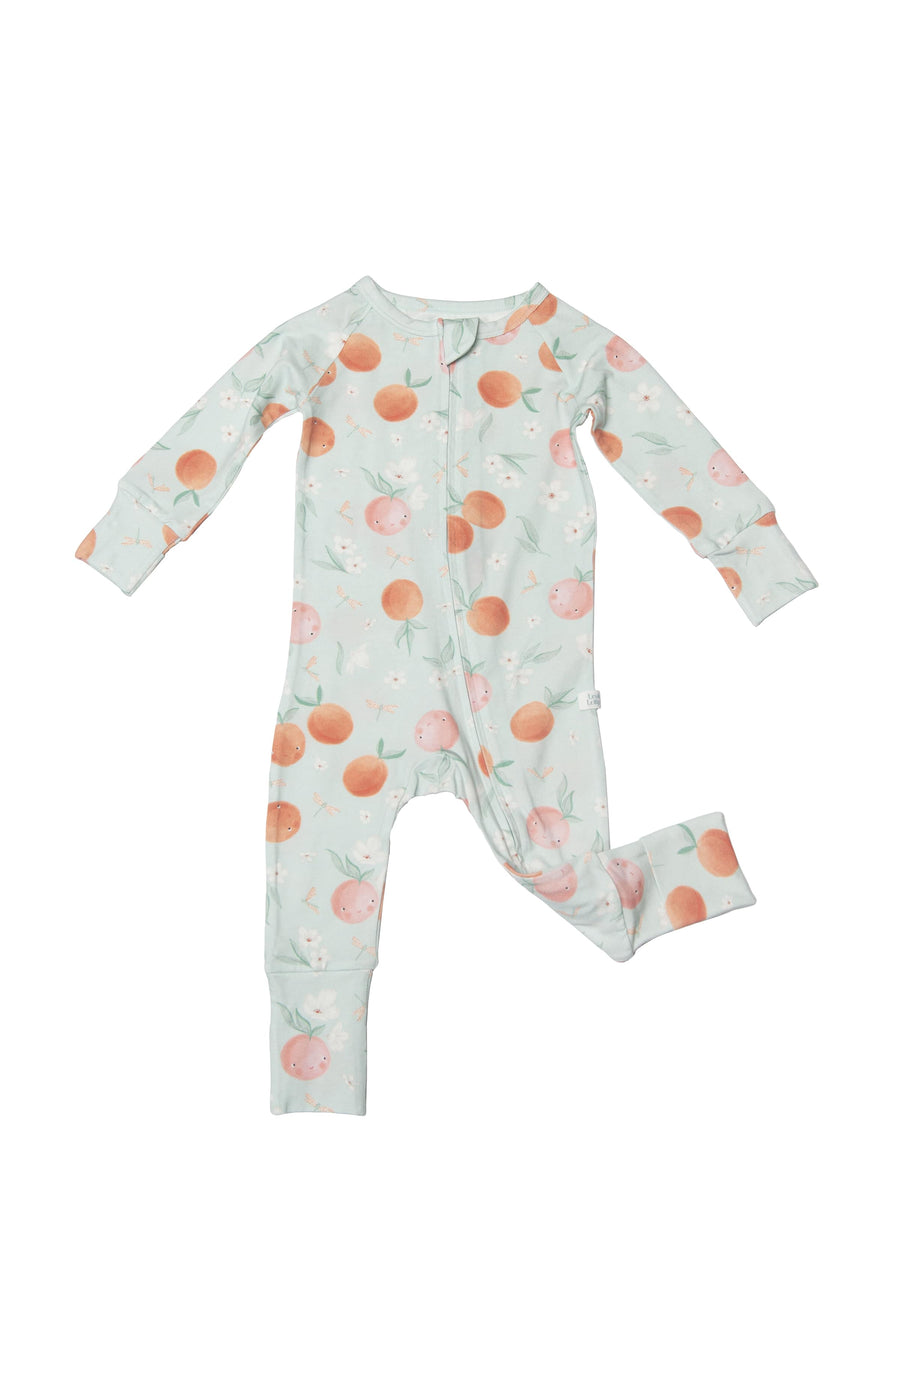 Elevate your baby's comfort with the Peaches Print Sleeper. Shop now for a delightful blend of style, sustainability, and Canadian design!